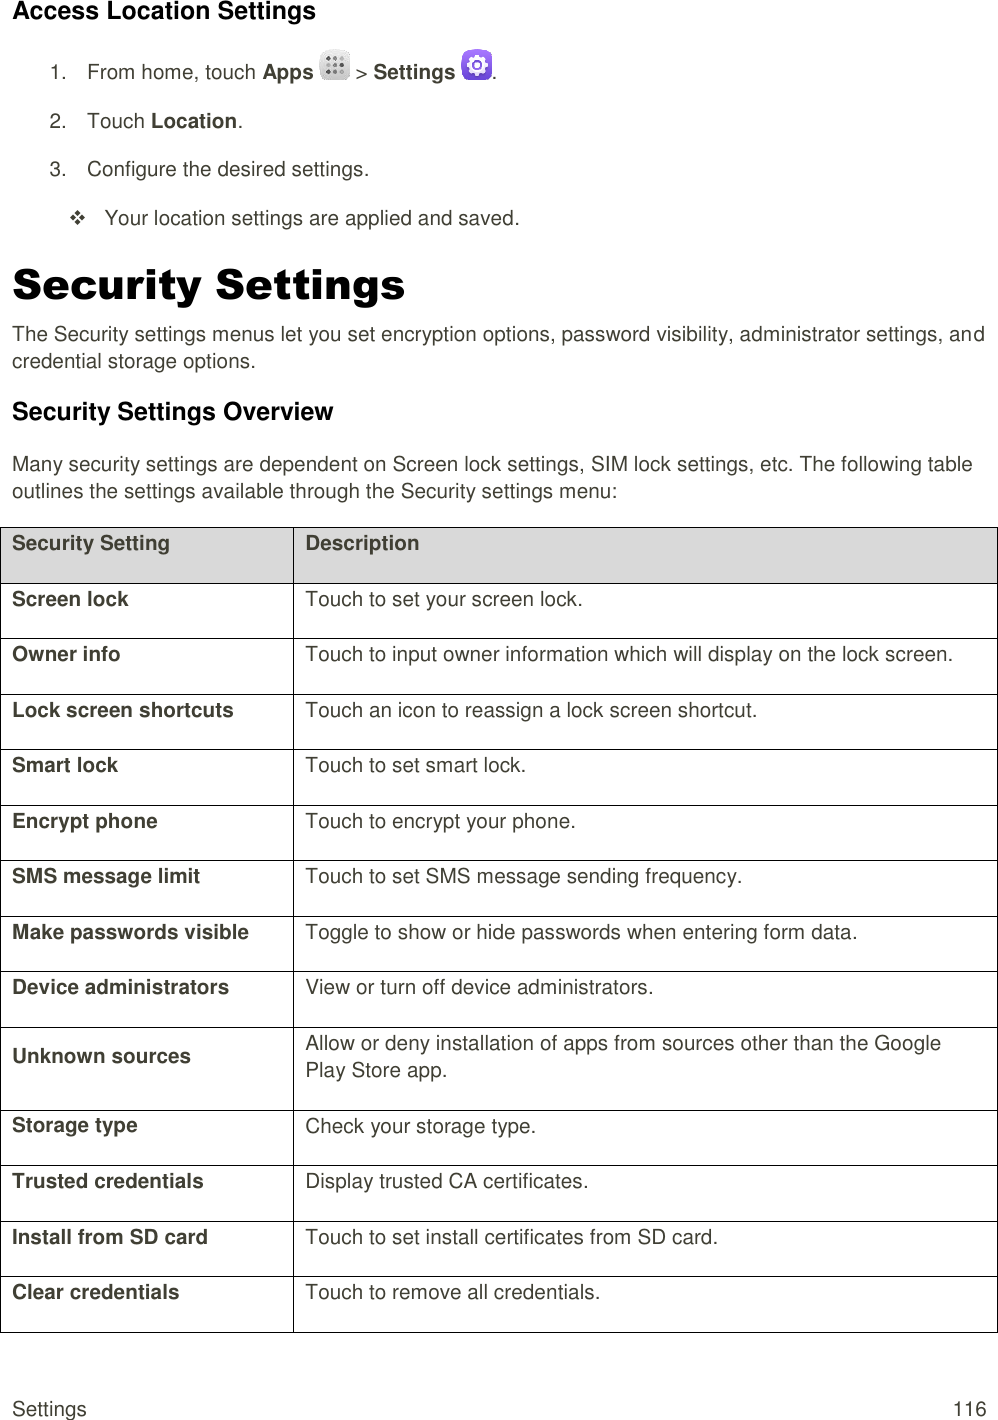 Settings  116 Access Location Settings 1.  From home, touch Apps   &gt; Settings . 2.  Touch Location. 3.  Configure the desired settings.      Your location settings are applied and saved. Security Settings The Security settings menus let you set encryption options, password visibility, administrator settings, and credential storage options. Security Settings Overview Many security settings are dependent on Screen lock settings, SIM lock settings, etc. The following table outlines the settings available through the Security settings menu:  Security Setting Description Screen lock Touch to set your screen lock.  Owner info Touch to input owner information which will display on the lock screen. Lock screen shortcuts Touch an icon to reassign a lock screen shortcut. Smart lock Touch to set smart lock. Encrypt phone Touch to encrypt your phone. SMS message limit Touch to set SMS message sending frequency. Make passwords visible Toggle to show or hide passwords when entering form data. Device administrators View or turn off device administrators. Unknown sources Allow or deny installation of apps from sources other than the Google Play Store app. Storage type Check your storage type. Trusted credentials Display trusted CA certificates. Install from SD card Touch to set install certificates from SD card. Clear credentials Touch to remove all credentials. 